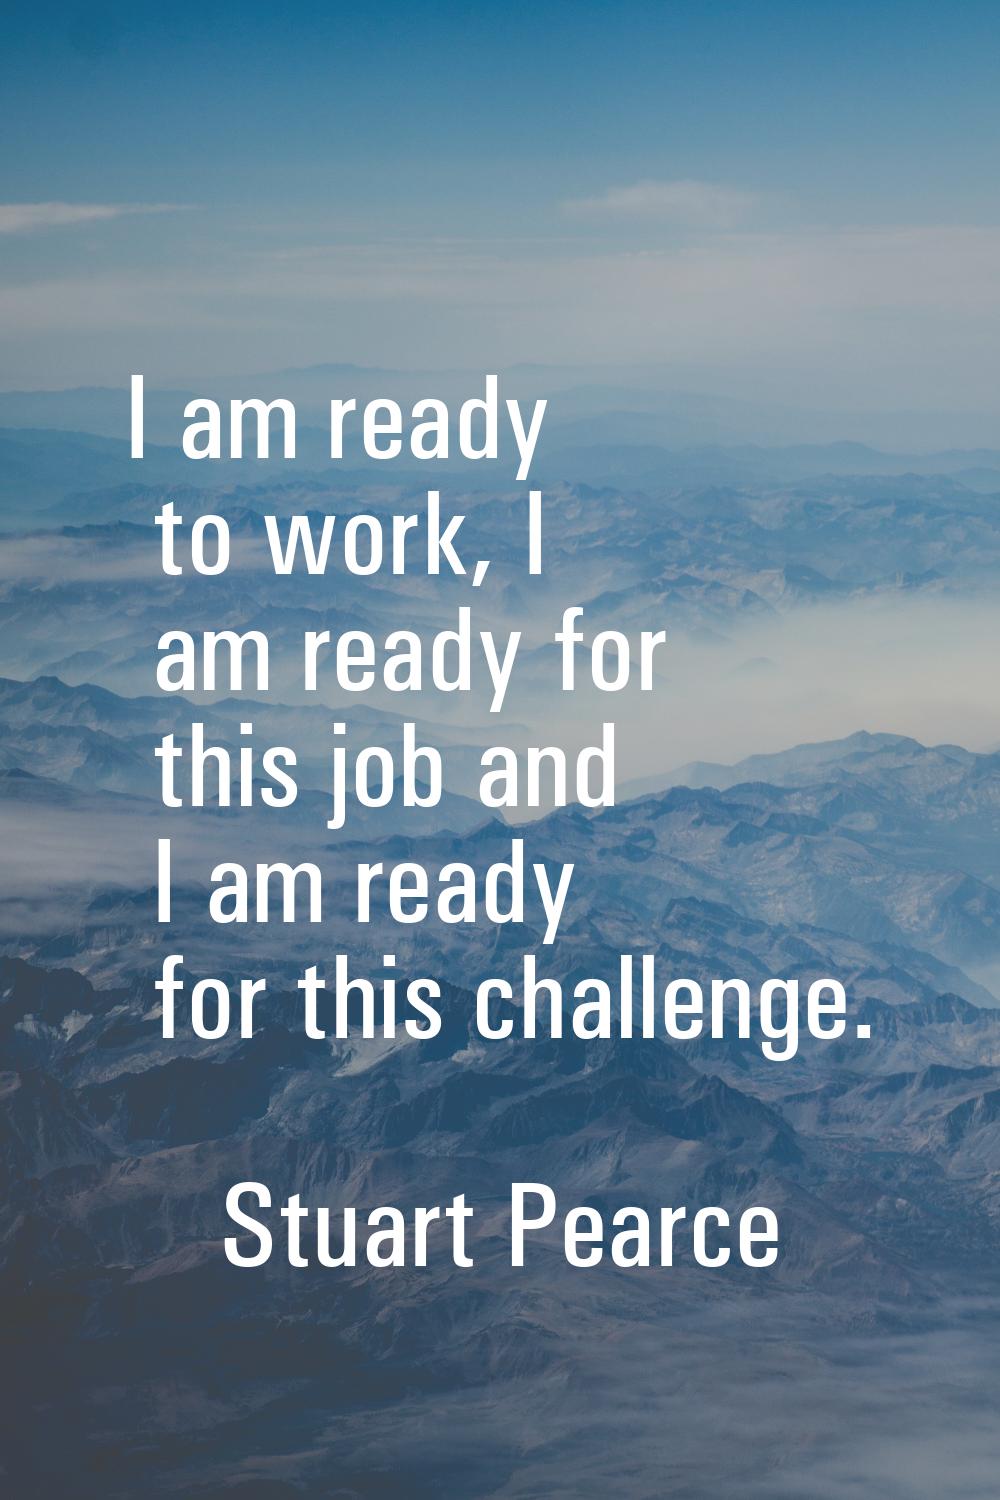 I am ready to work, I am ready for this job and I am ready for this challenge.